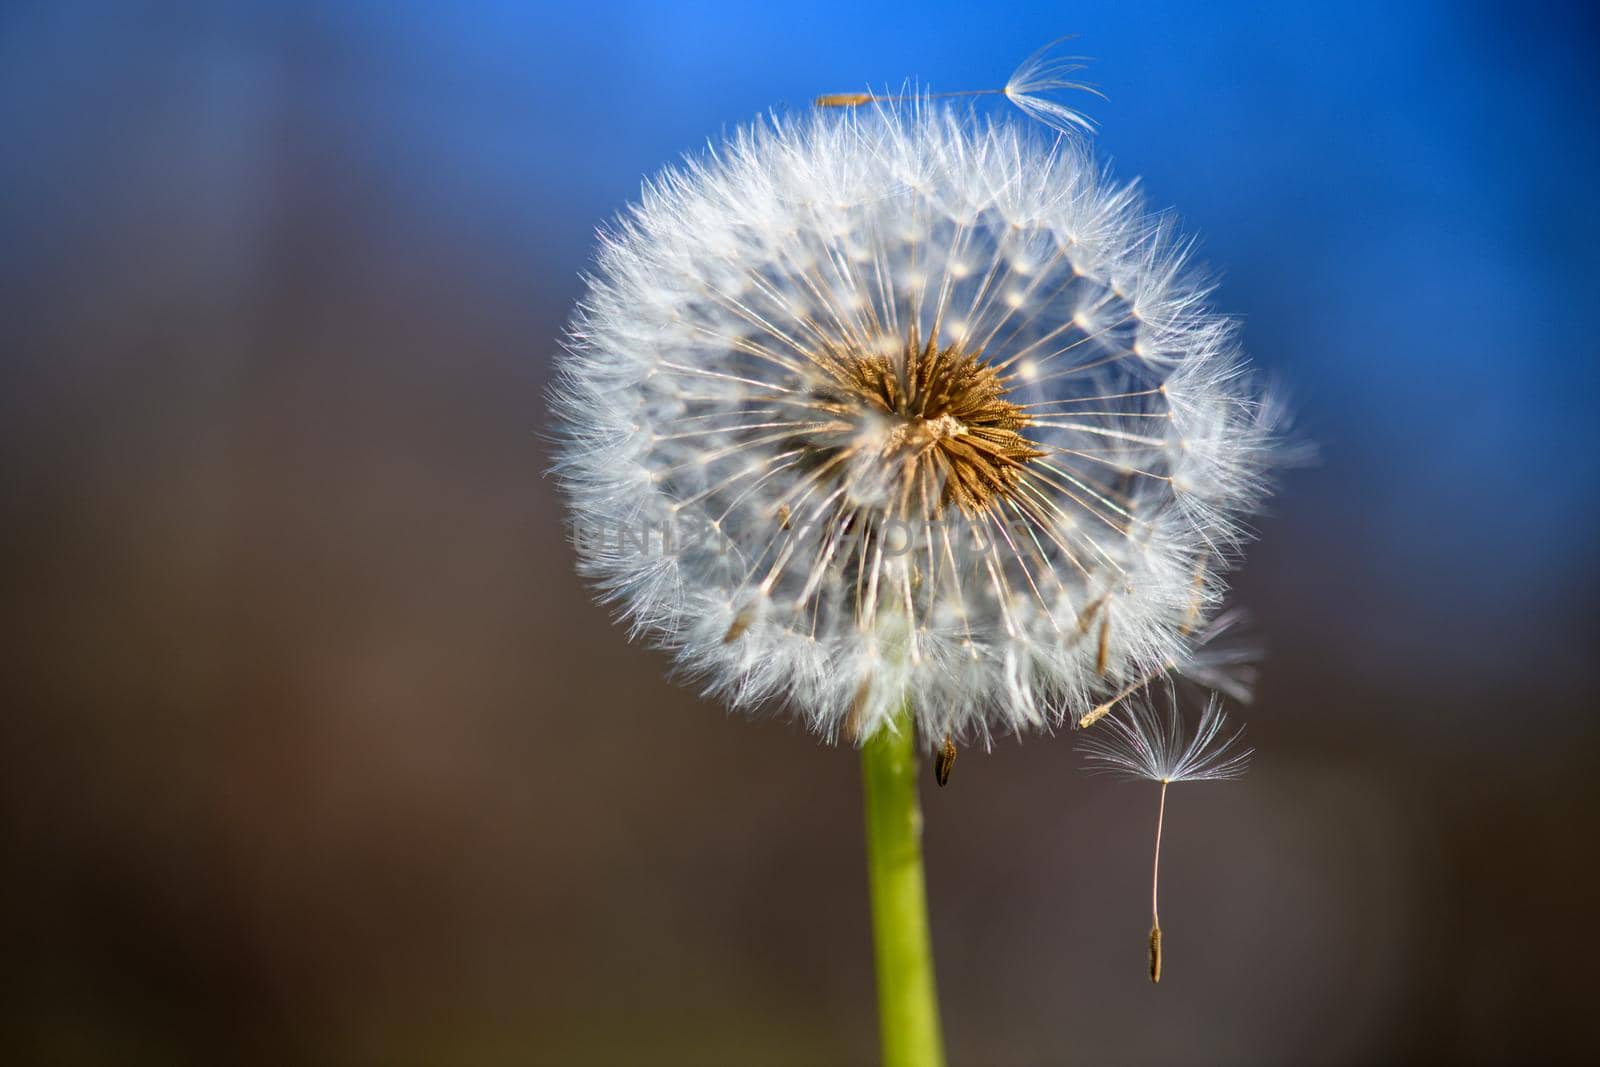 A single withered dandelion flower against an indefinite and blurry brown and blue background in the warm sunlight.